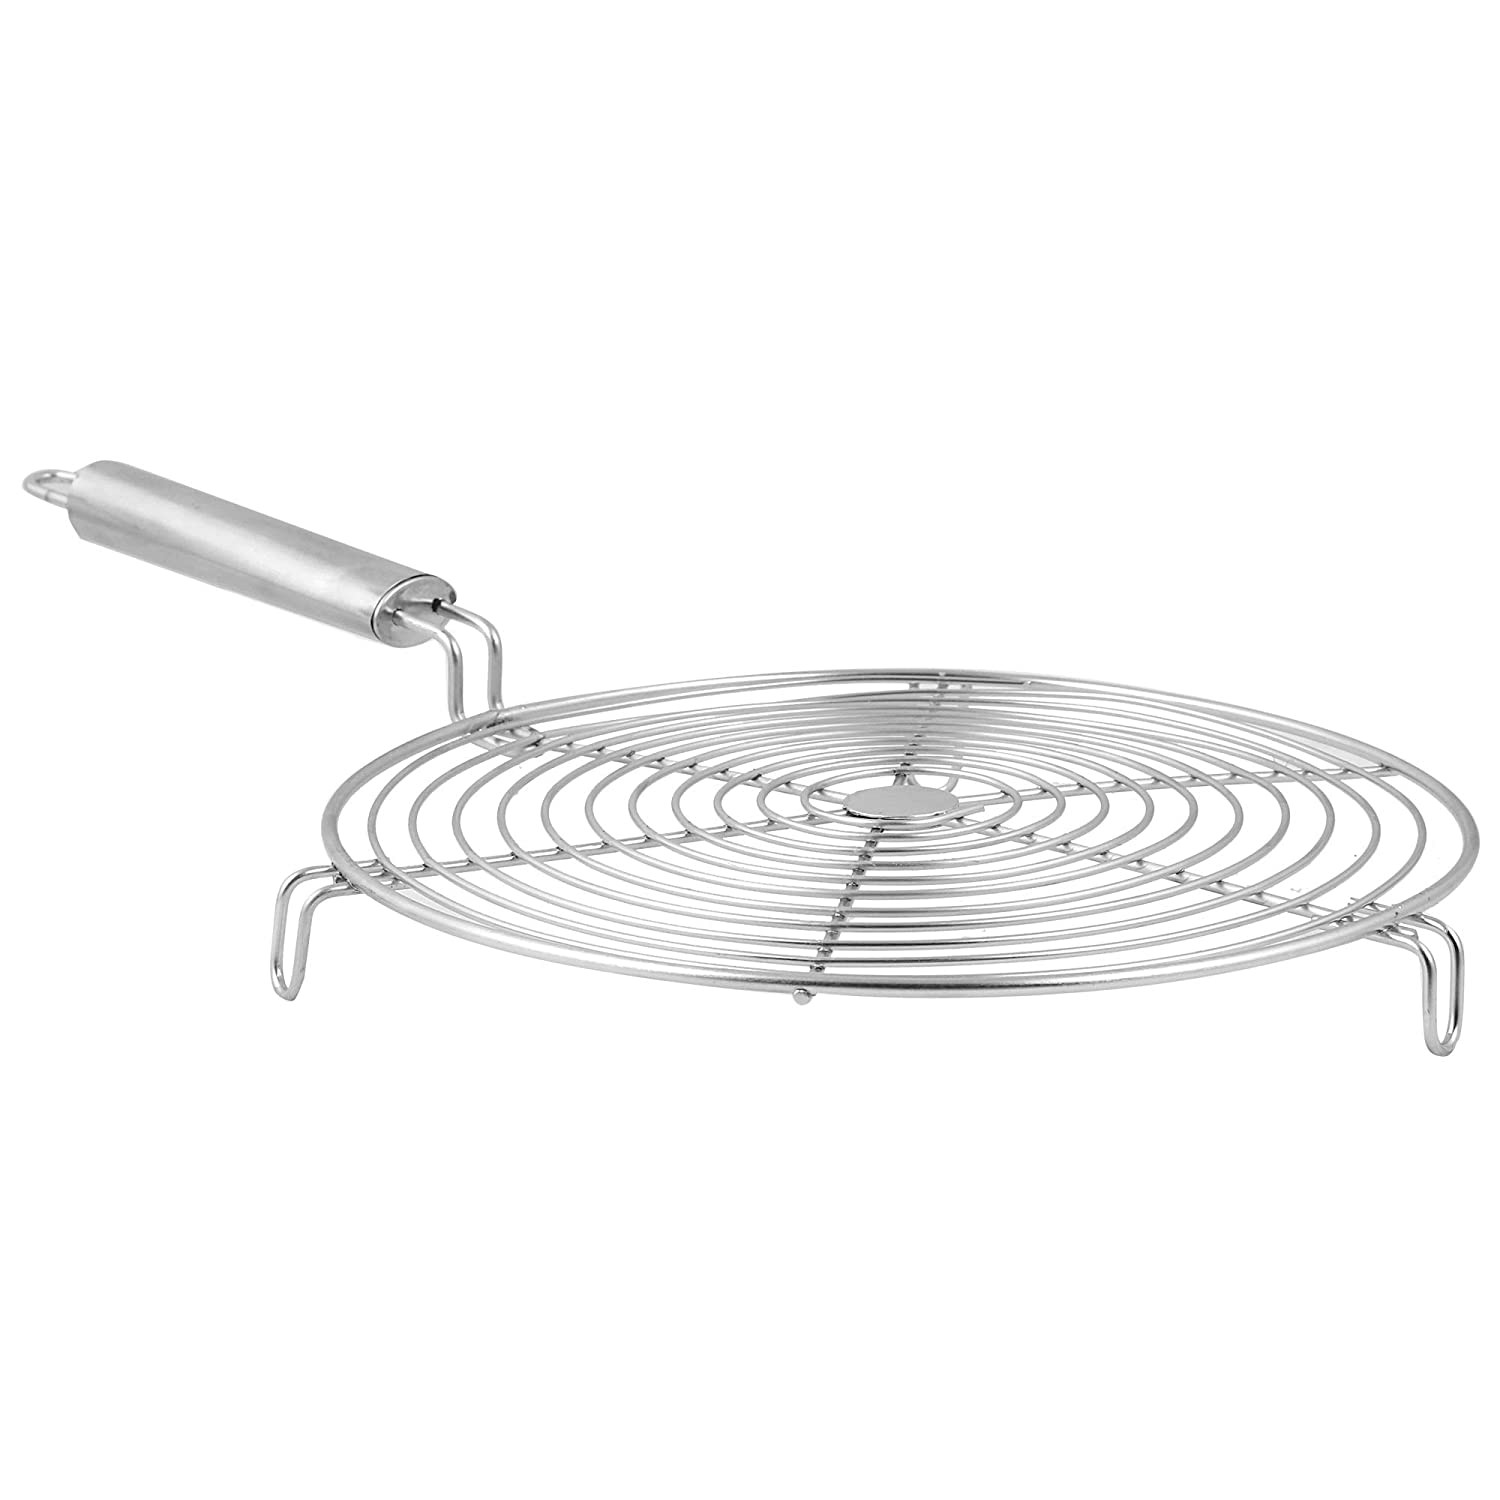 Kuber Industries Small Stainless Steel Round Papad Jali/Roti Roast Grill/Papad Roast Grill with Steel Handle (Silver)